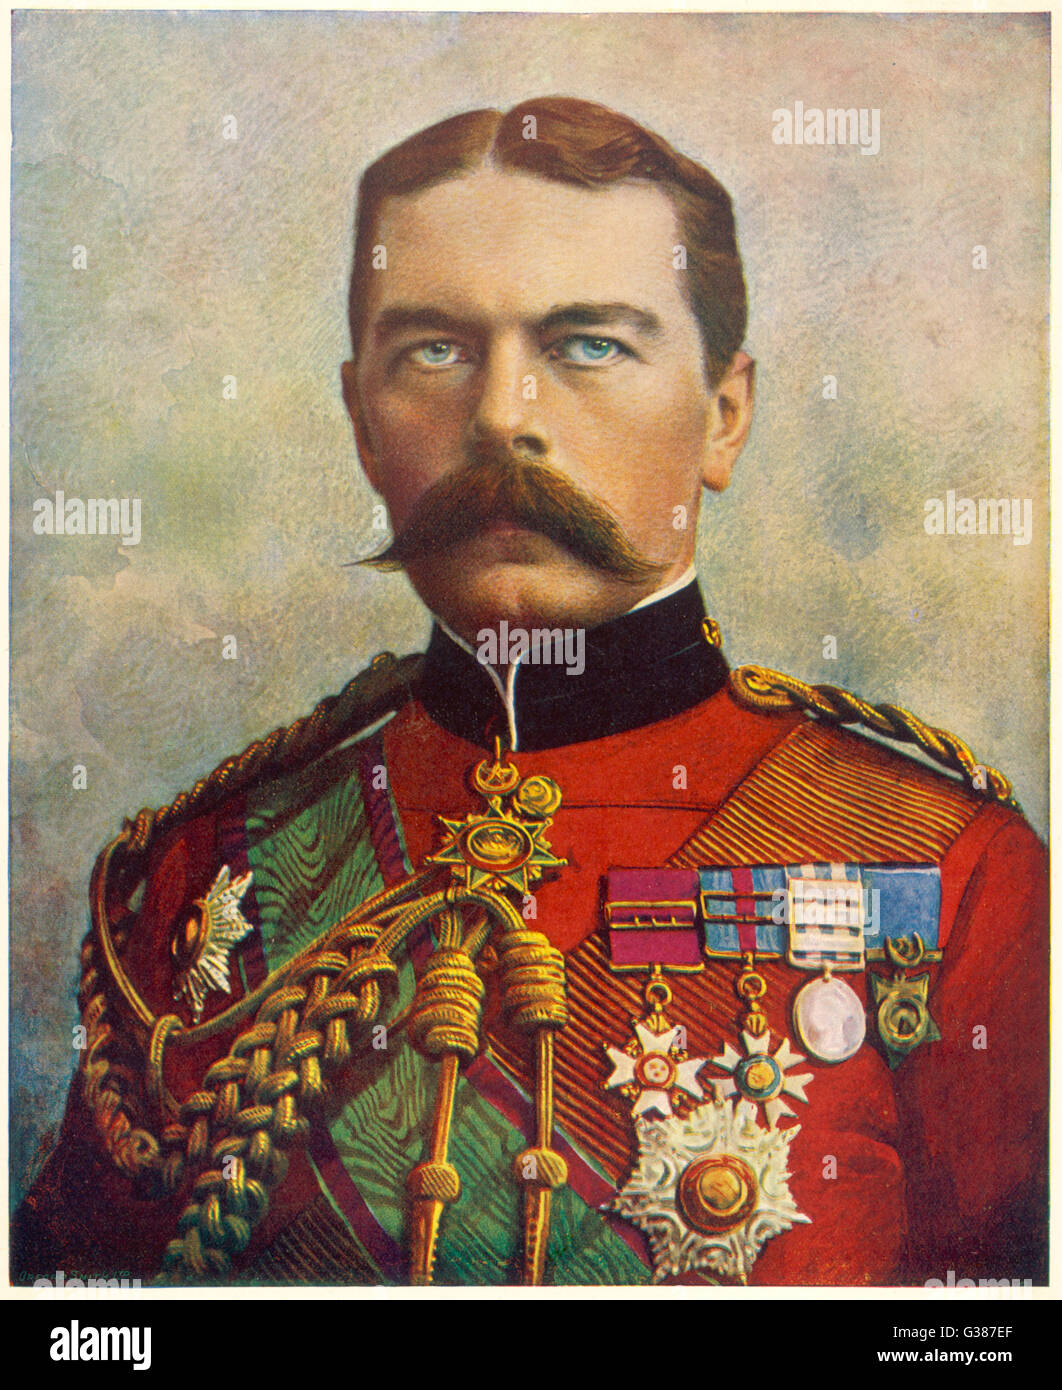 Horatio Lord Kitchener 1st Earl Kitchener Of Khartoum Soldier Date G387EF 